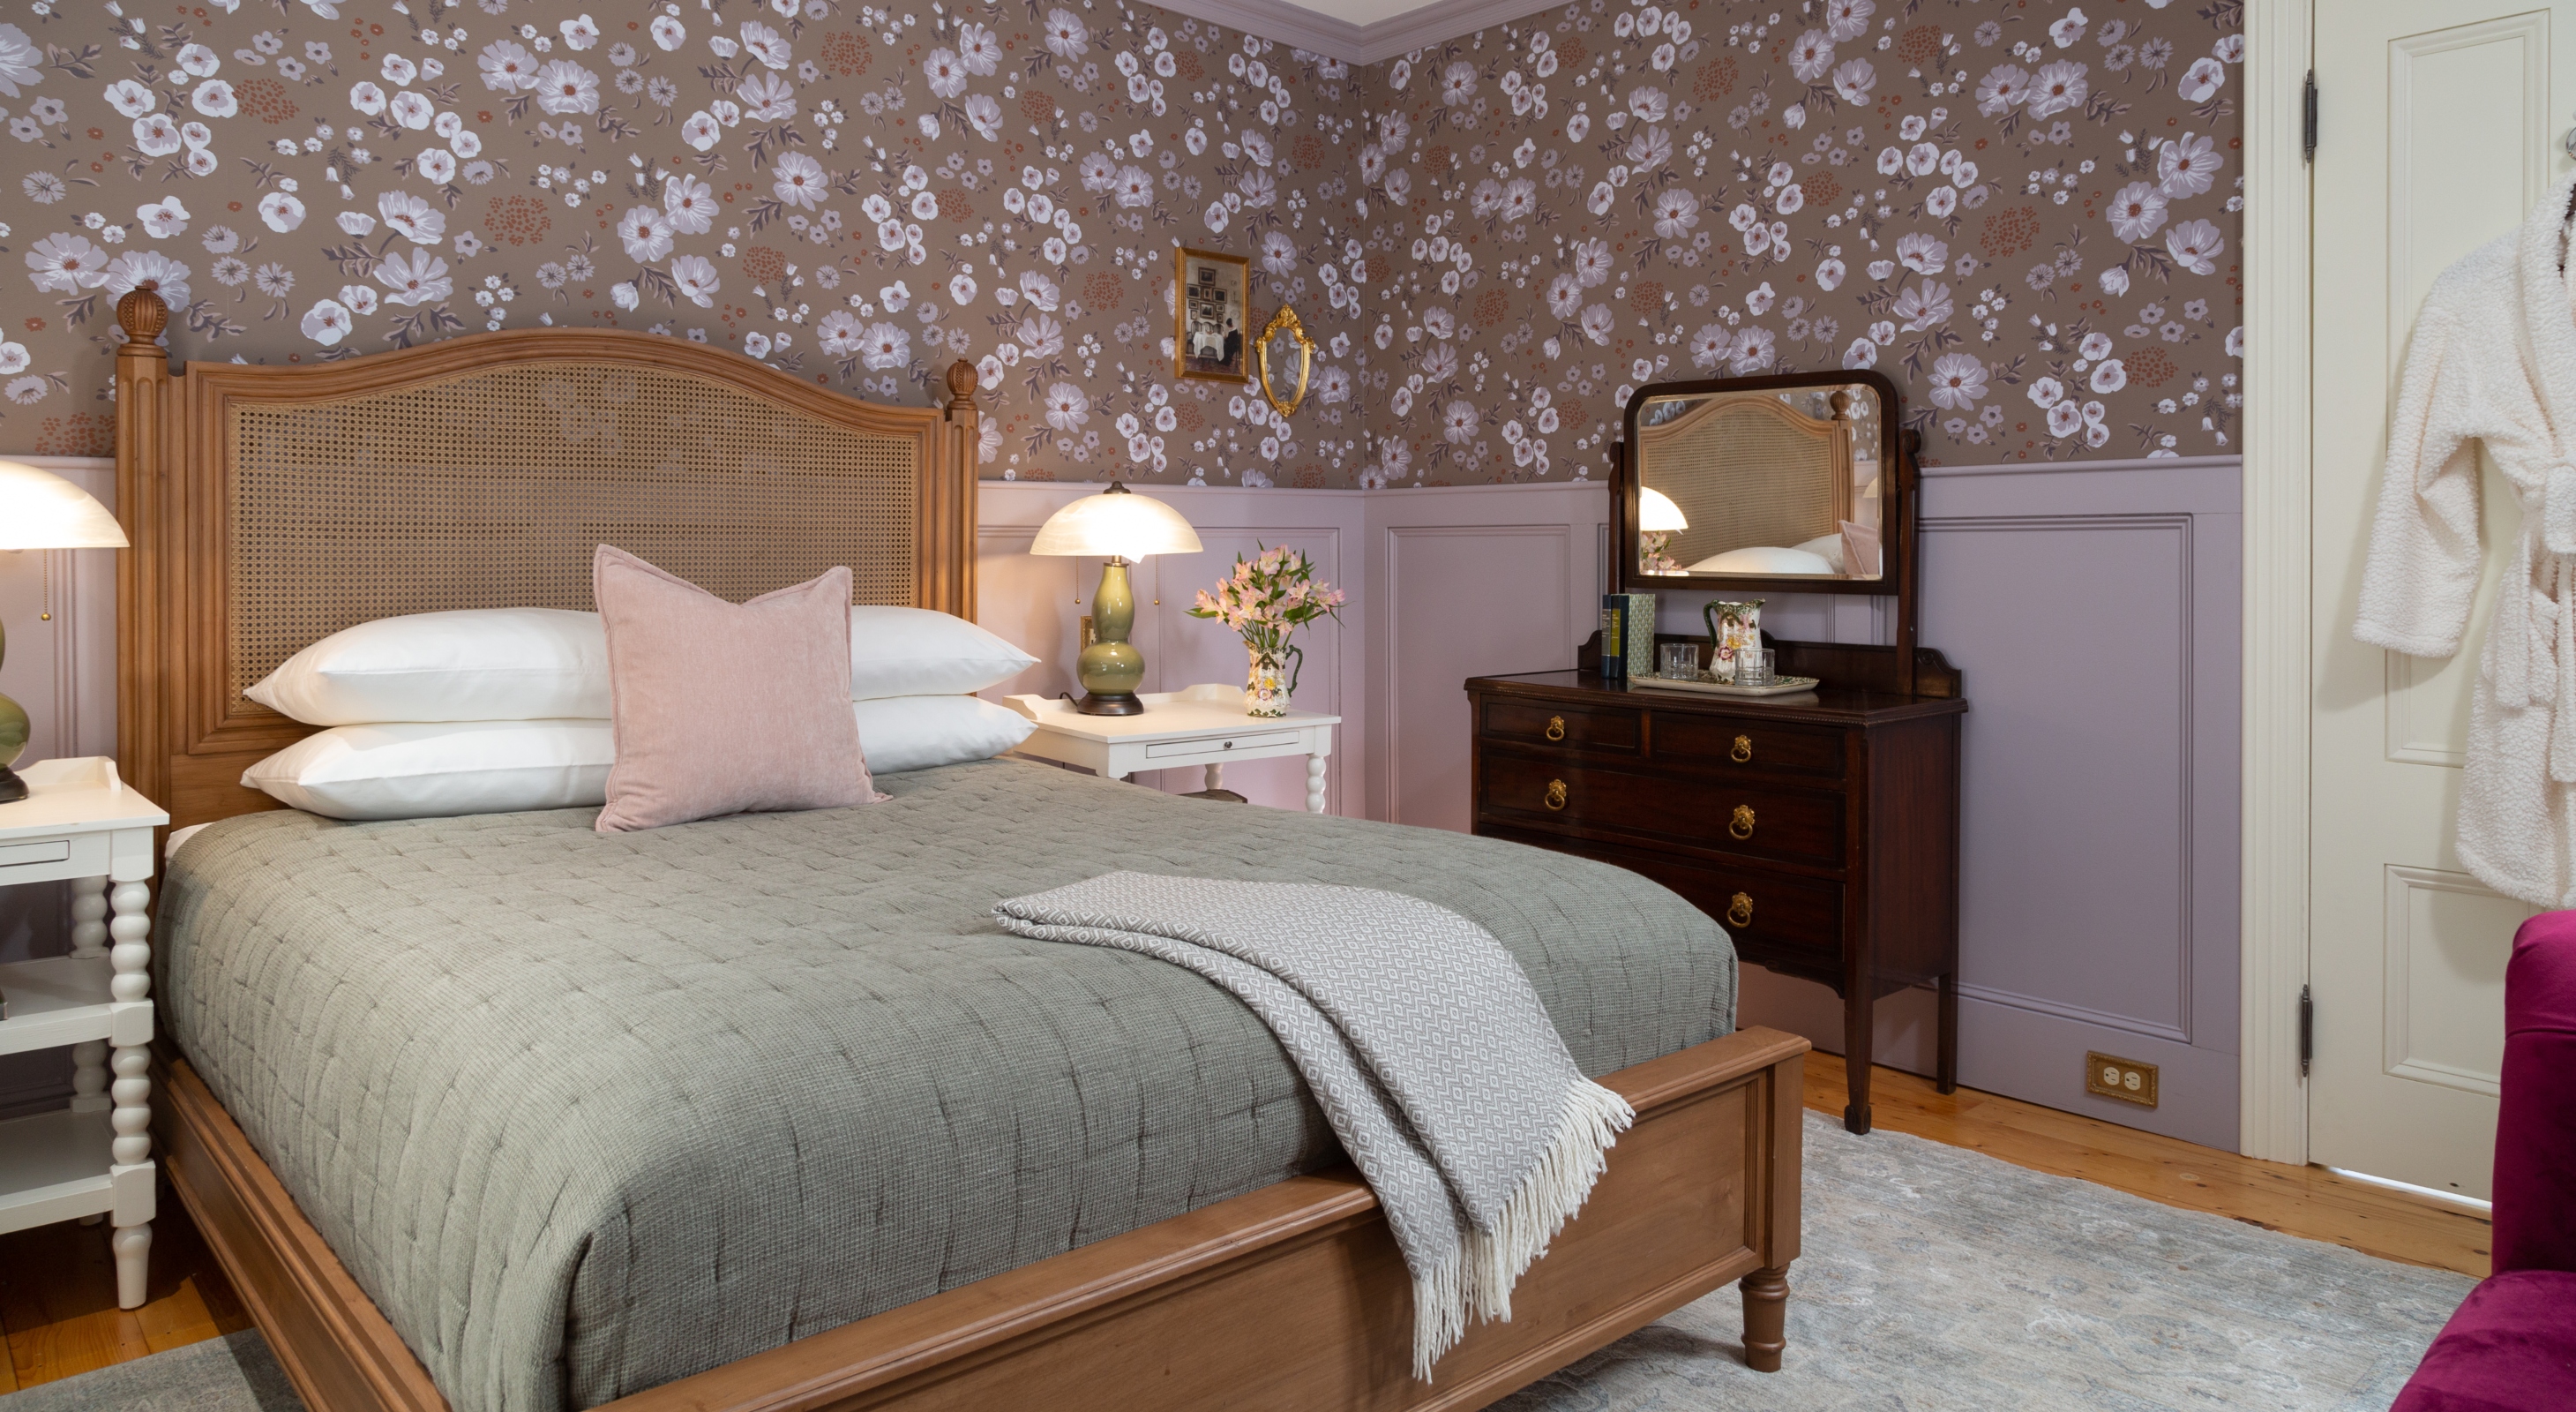 Queen bed in a room with a window and antique dresser with mirror at our Maine Coast B&B